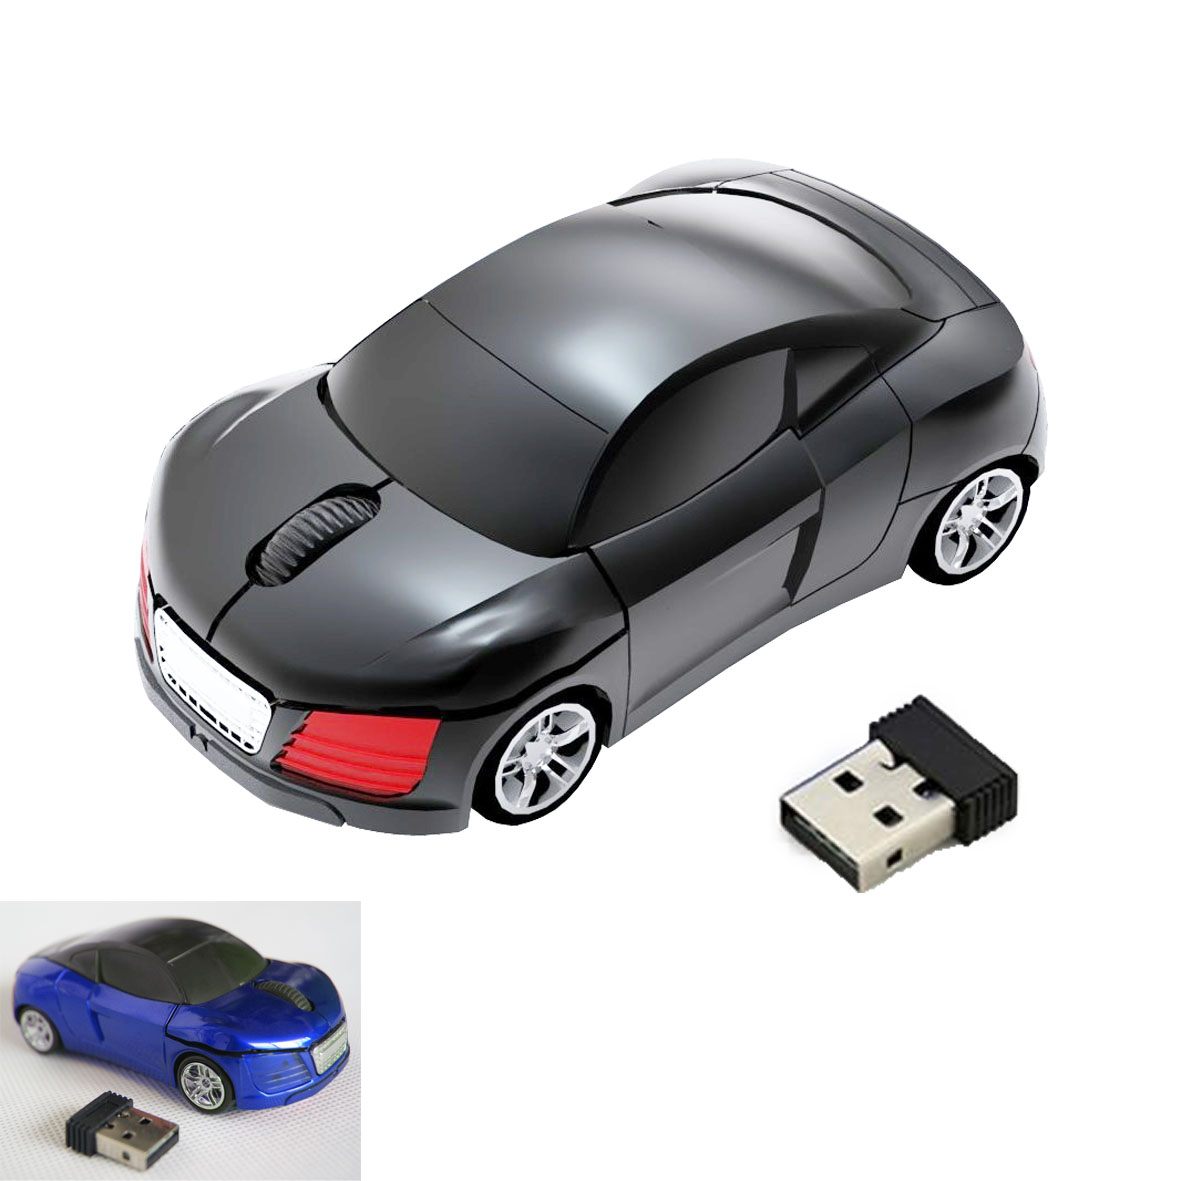 GL-AAA1290 3D Car Shaped USB Wireless Mouse 2.4GHz